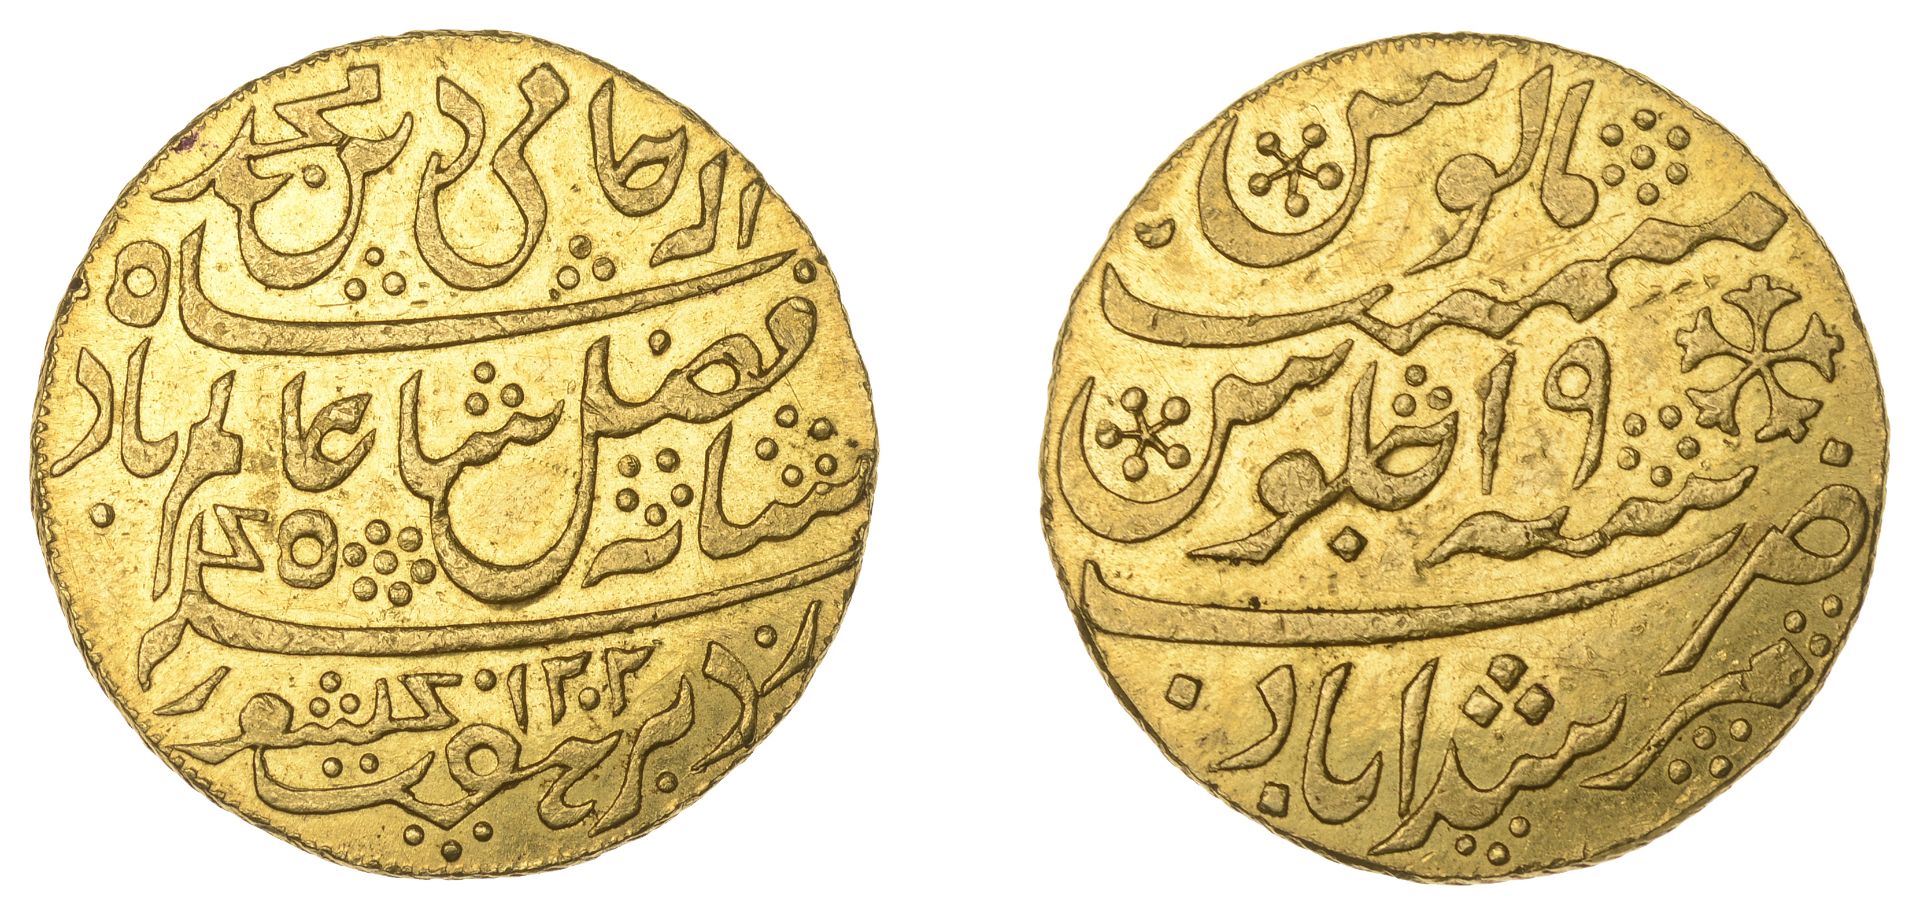 East India Company, Bengal Presidency, Calcutta Mint: Introduction of Steam, gold Pattern Mo...